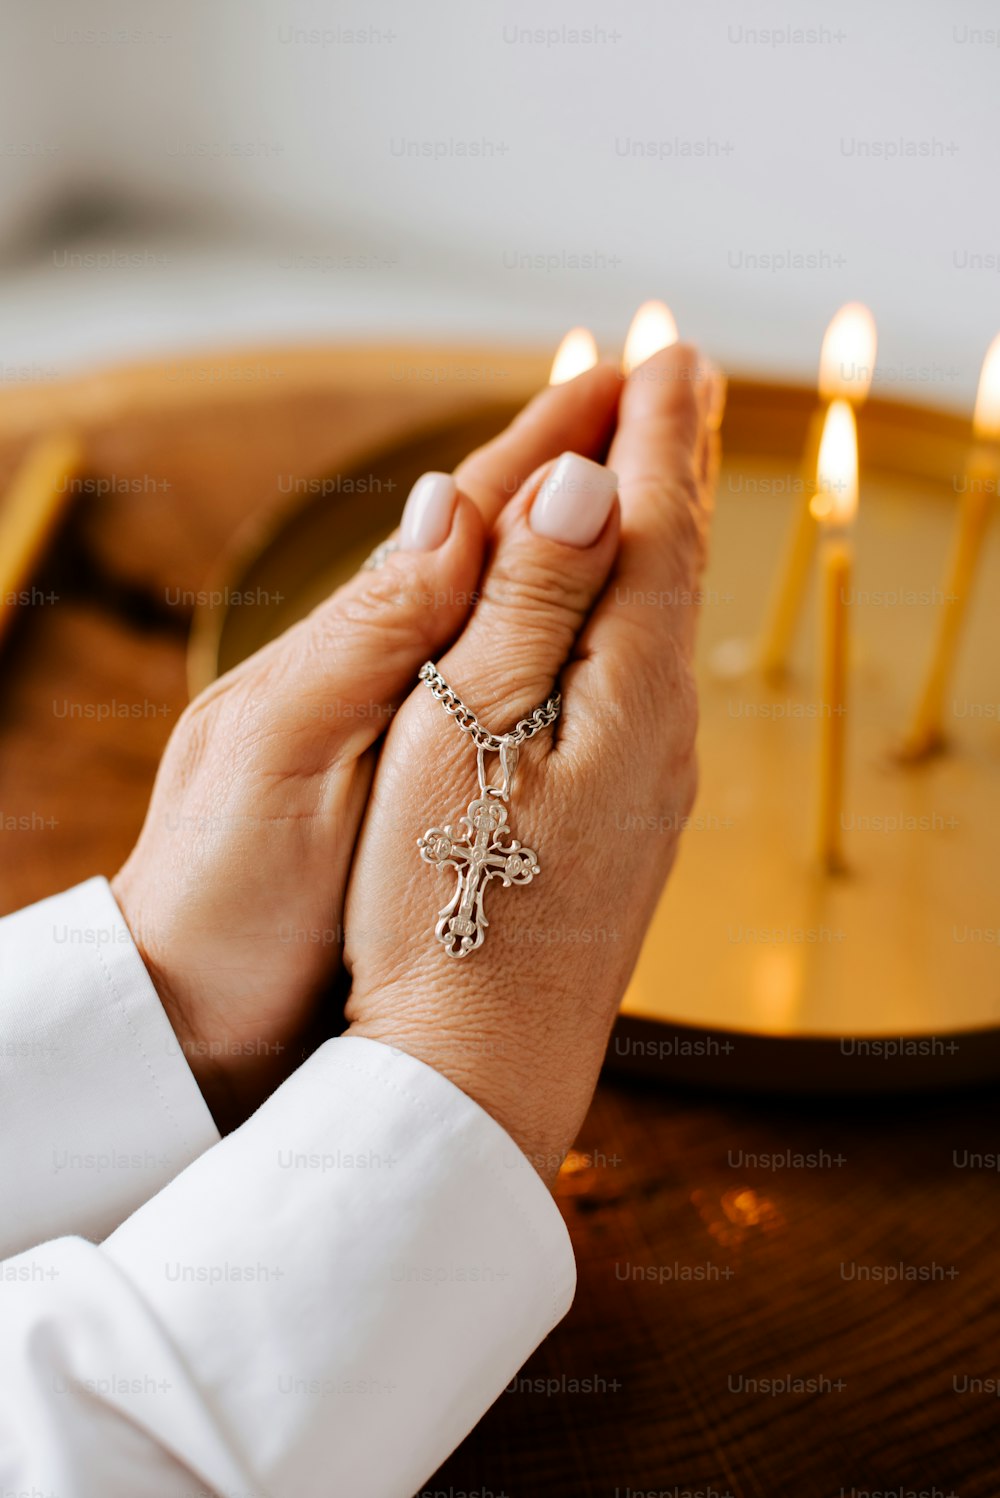 a woman holding her hands in front of a plate with candles